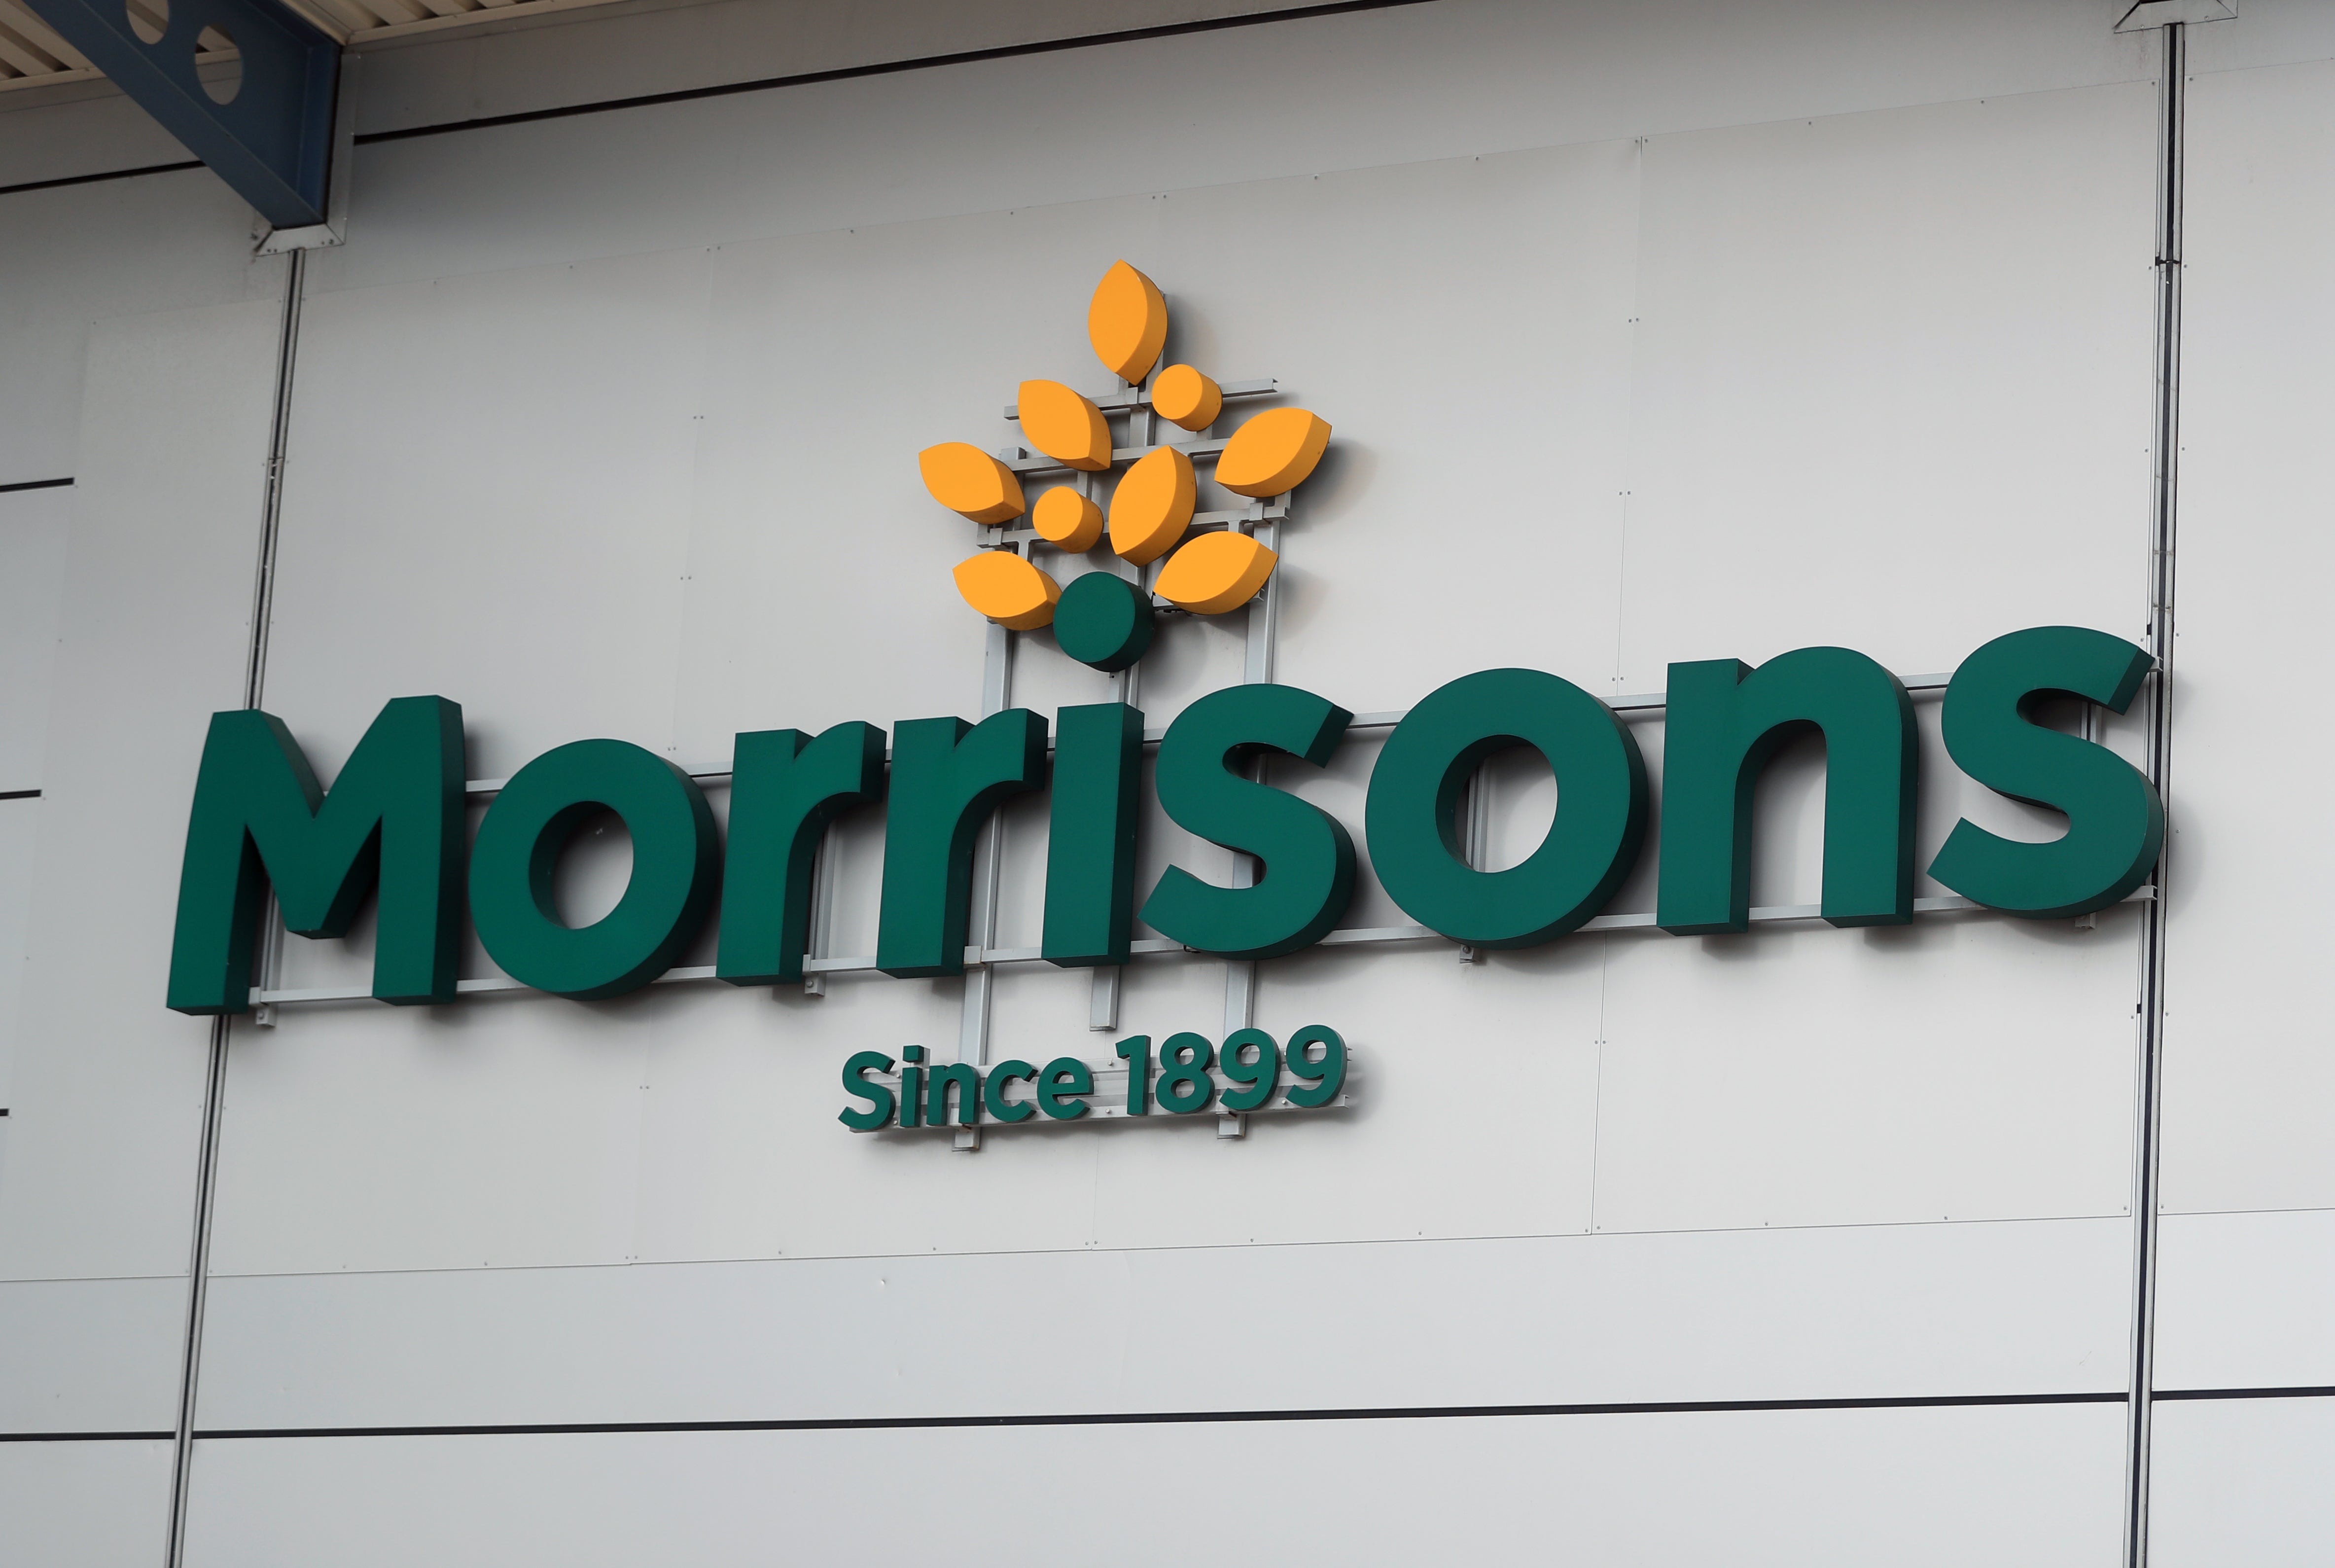 A ‘cynical and opportunistic’ bid has been made for Morrisons by private equity firm Clayton, Dubilier & Rice